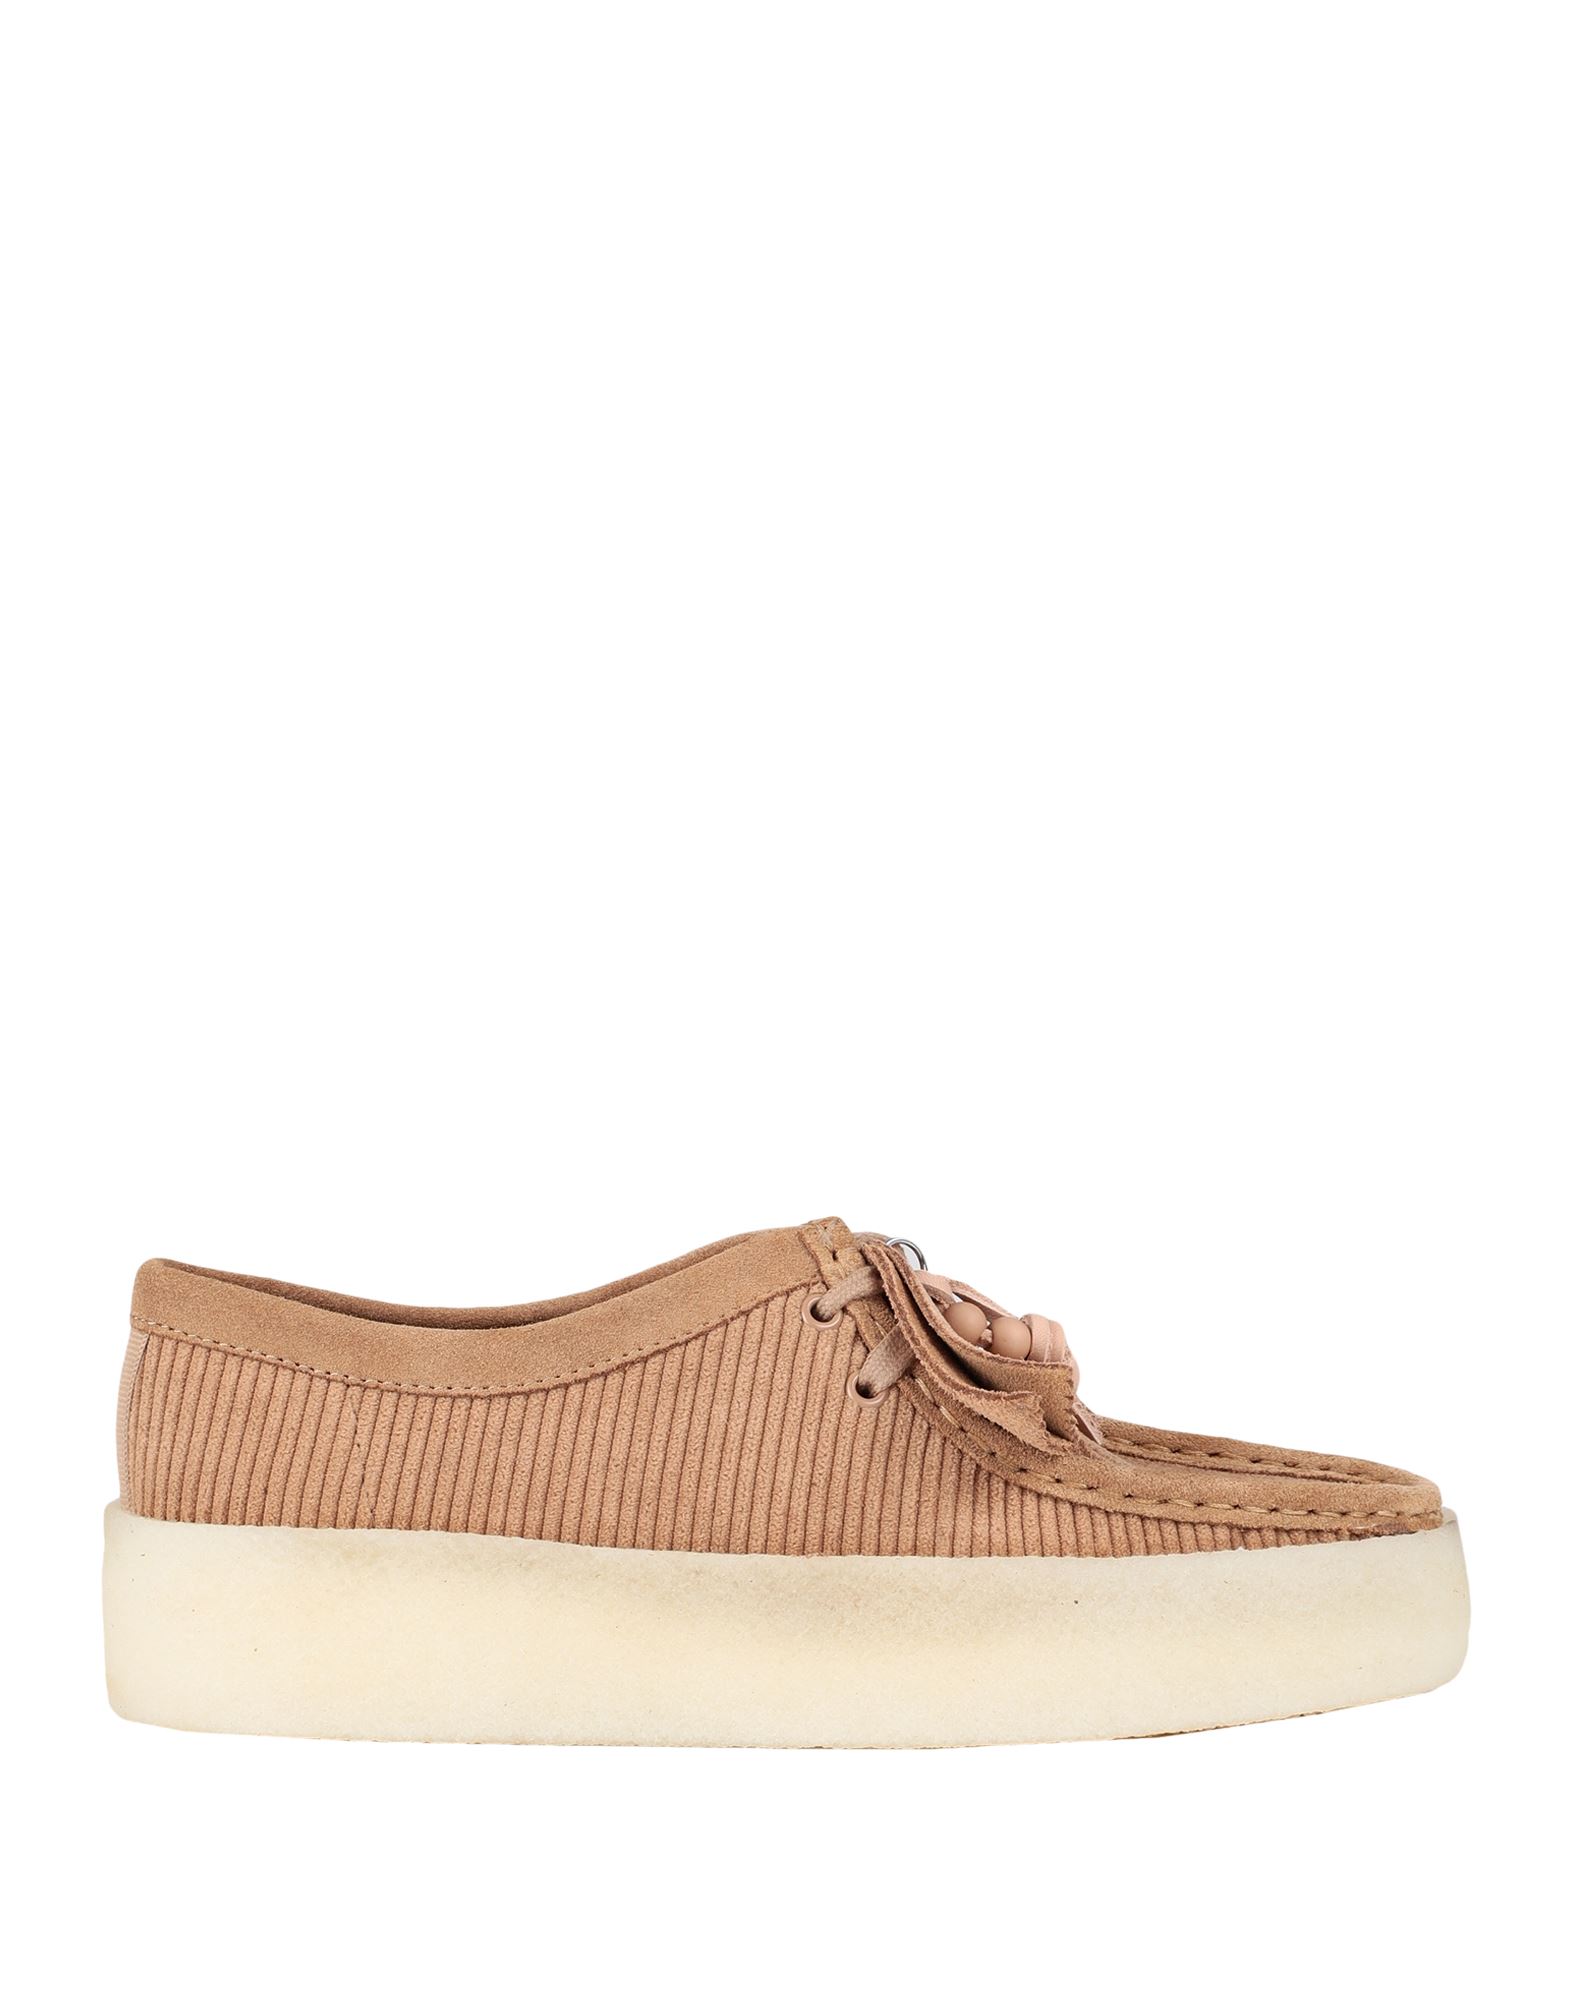 ԥ볫CLARKS ORIGINALS ǥ 졼åץ塼  3.5  /  WALLABEE CUP.W